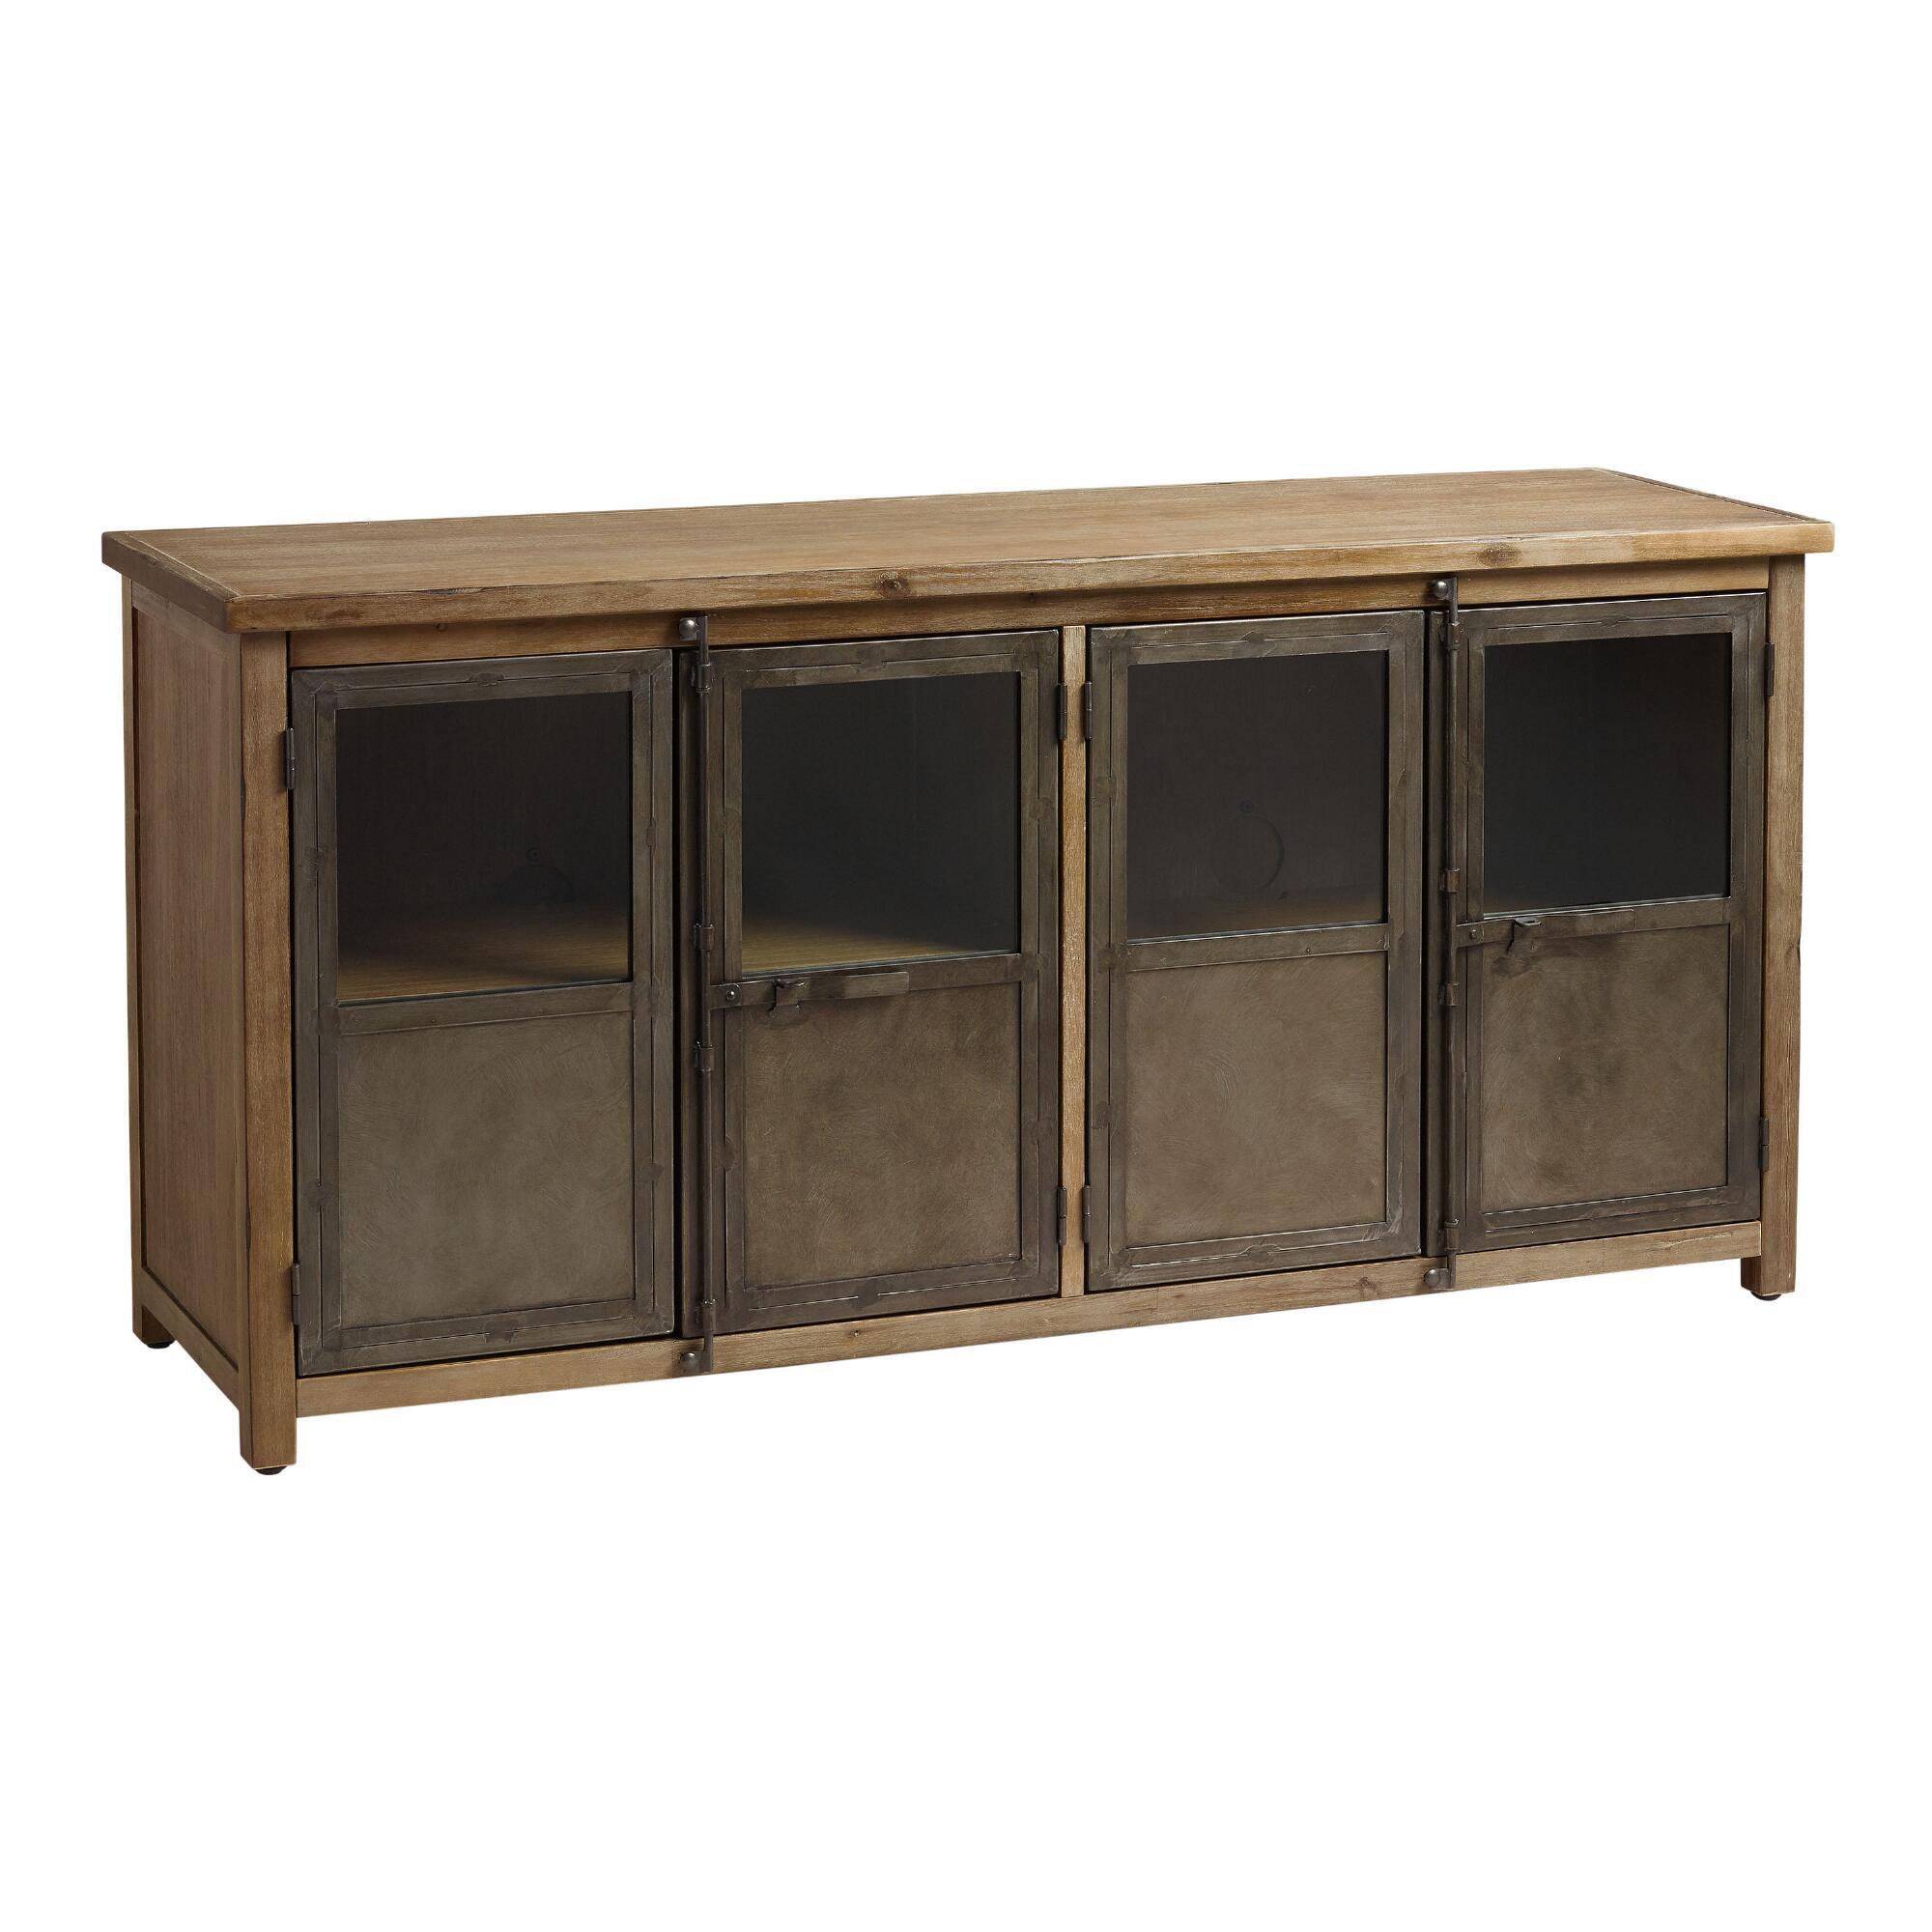 Langley Storage Cabinet: Brown - Wood by World Market